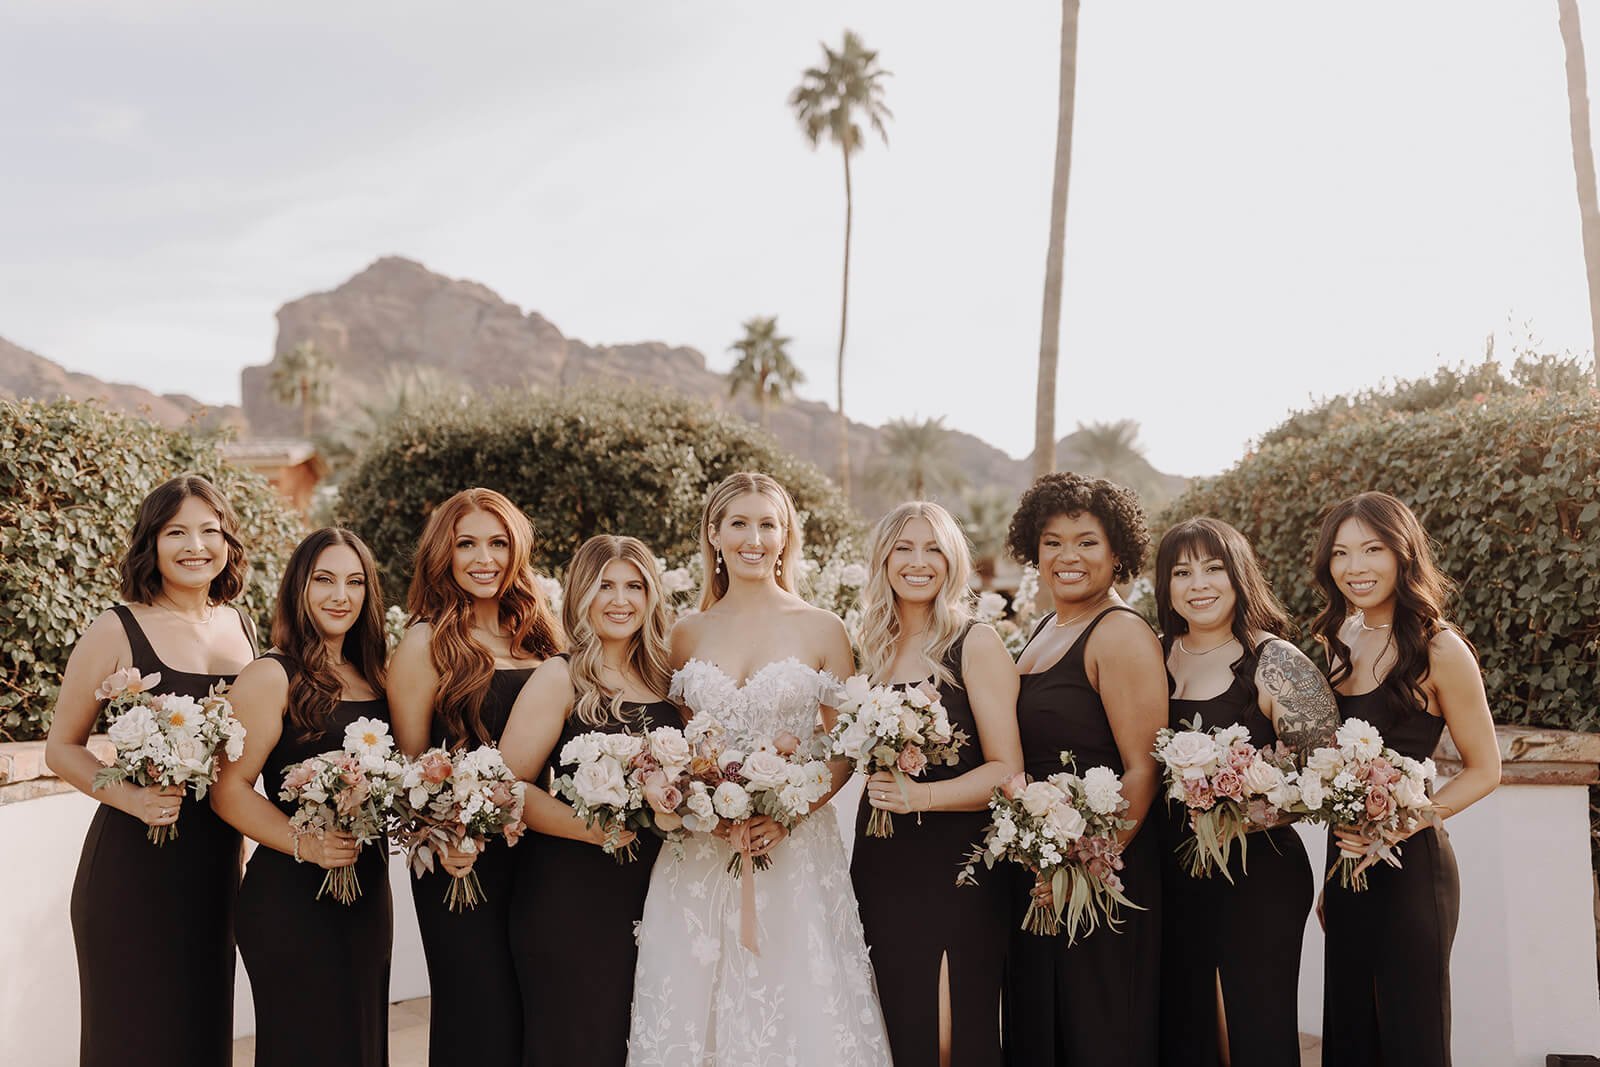 Bride and bridesmaids with floral boquets outside with mountains in background